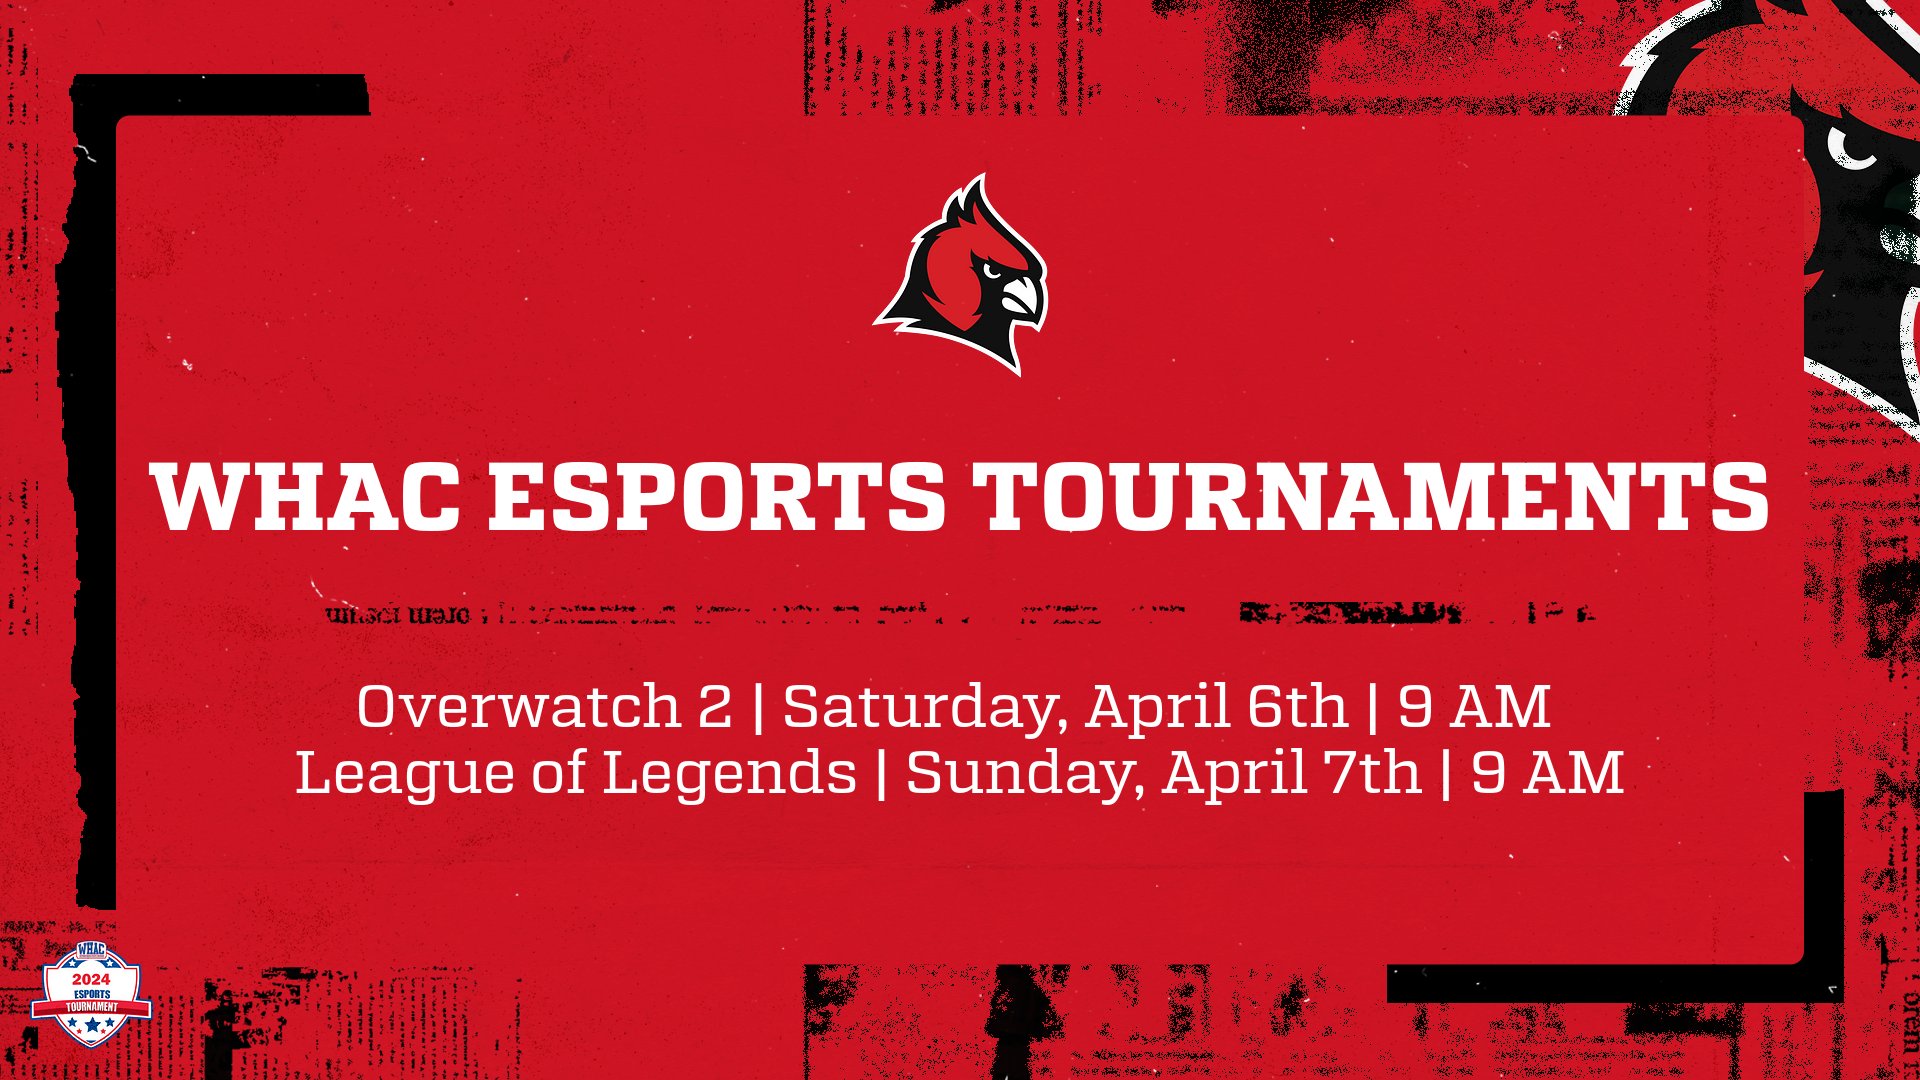 Overwatch 2 and League of Legends prepare for their WHAC Tournaments